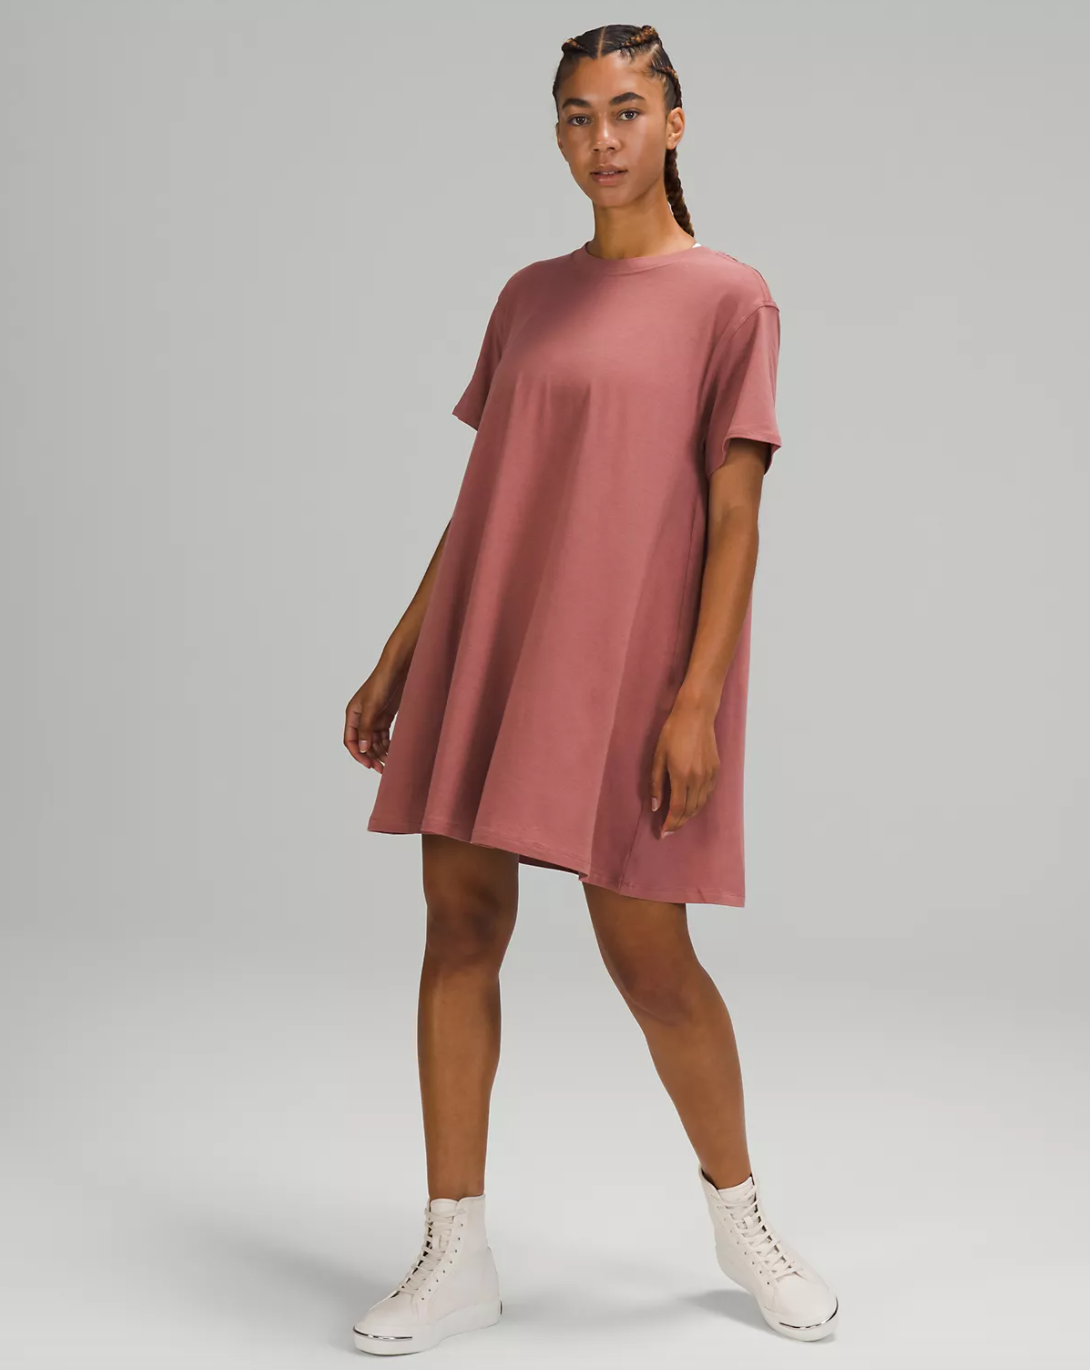 T-Shirt Dress Styles For Summer Style 2021